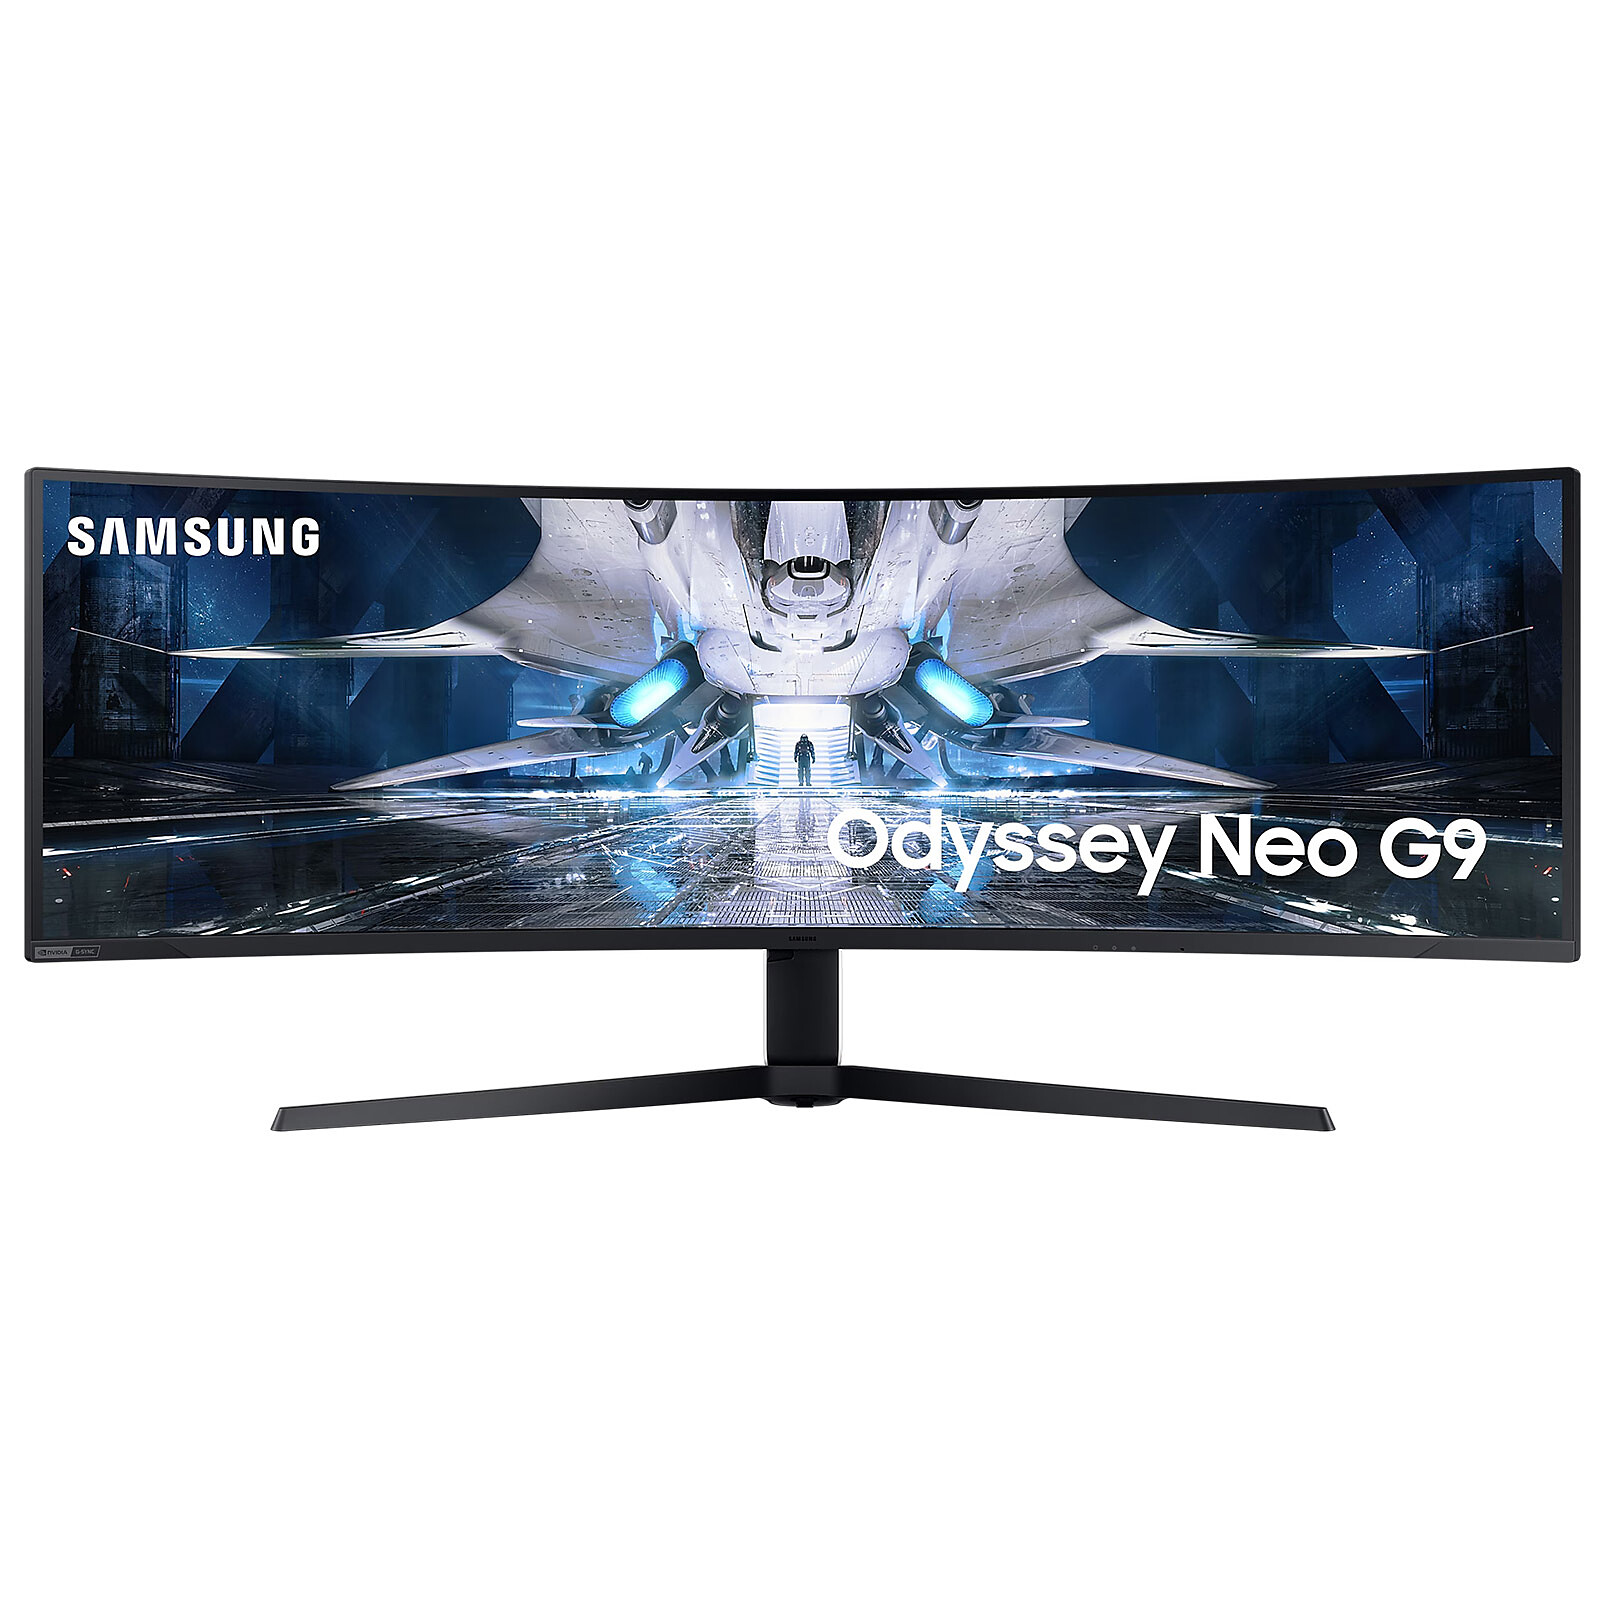 Samsung 49 QLED - Odyssey Neo G9 S49AG950NP - Monitor PC - LDLC